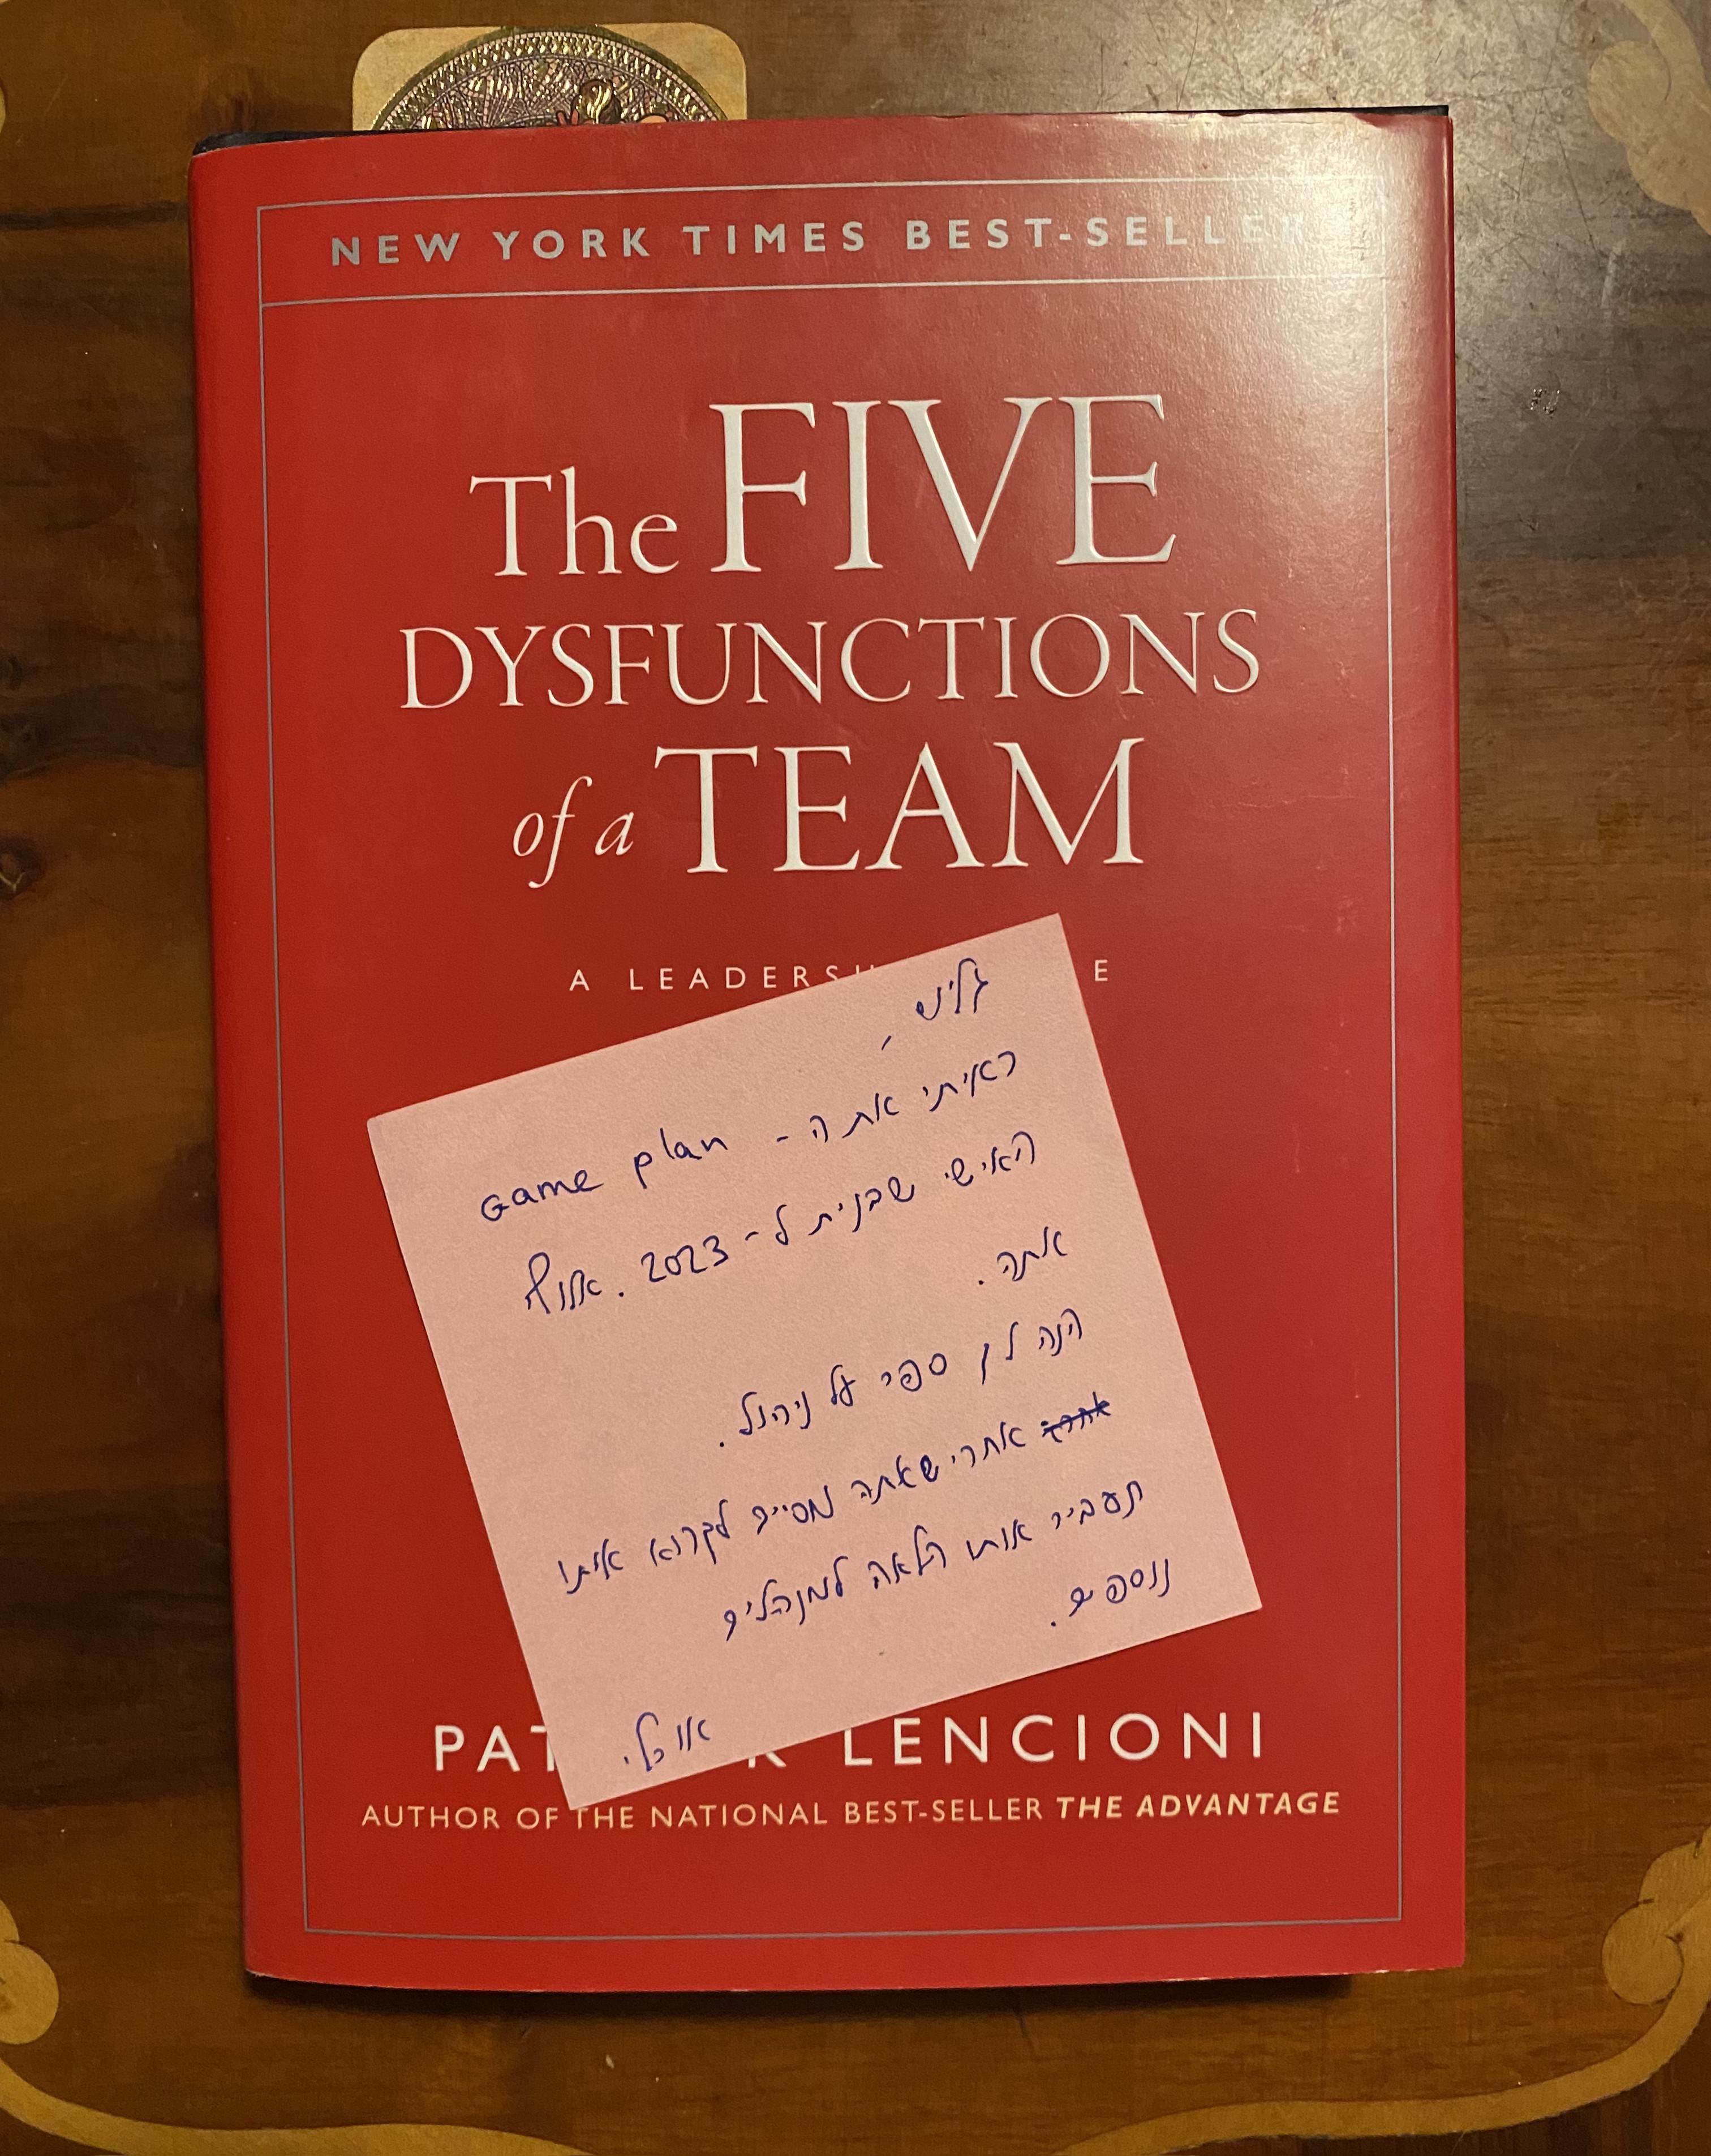 "The Five Dysfunction of a Team" book cover with a personal note